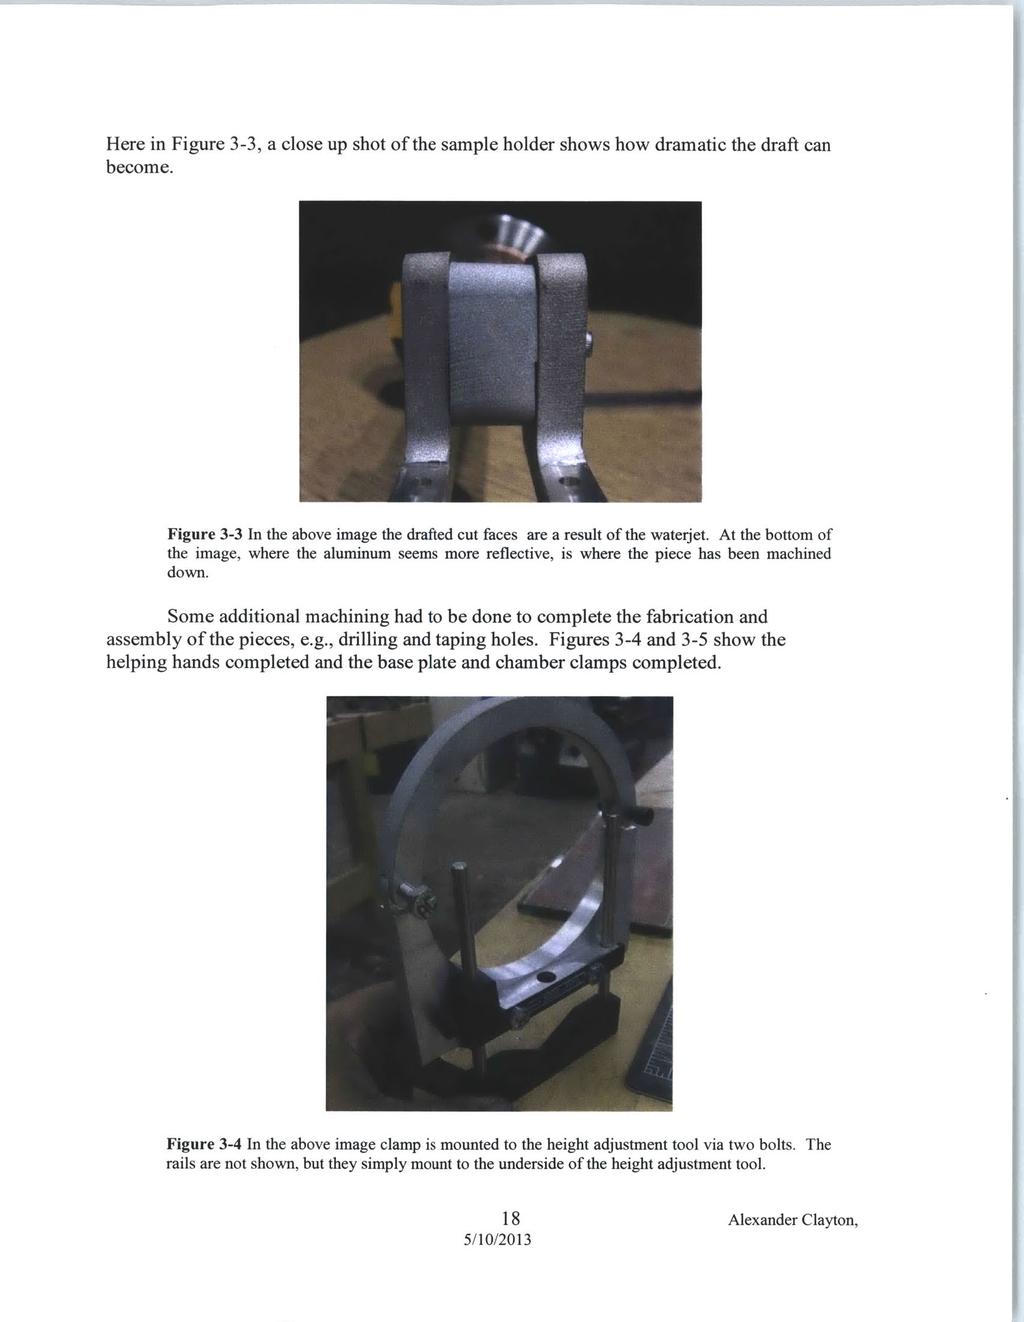 Here in Figure 3-3, a close up shot of the sample holder shows how dramatic the draft can become. Figure 3-3 the image, down. In the above image the drafted cut faces are a result of the waterjet.